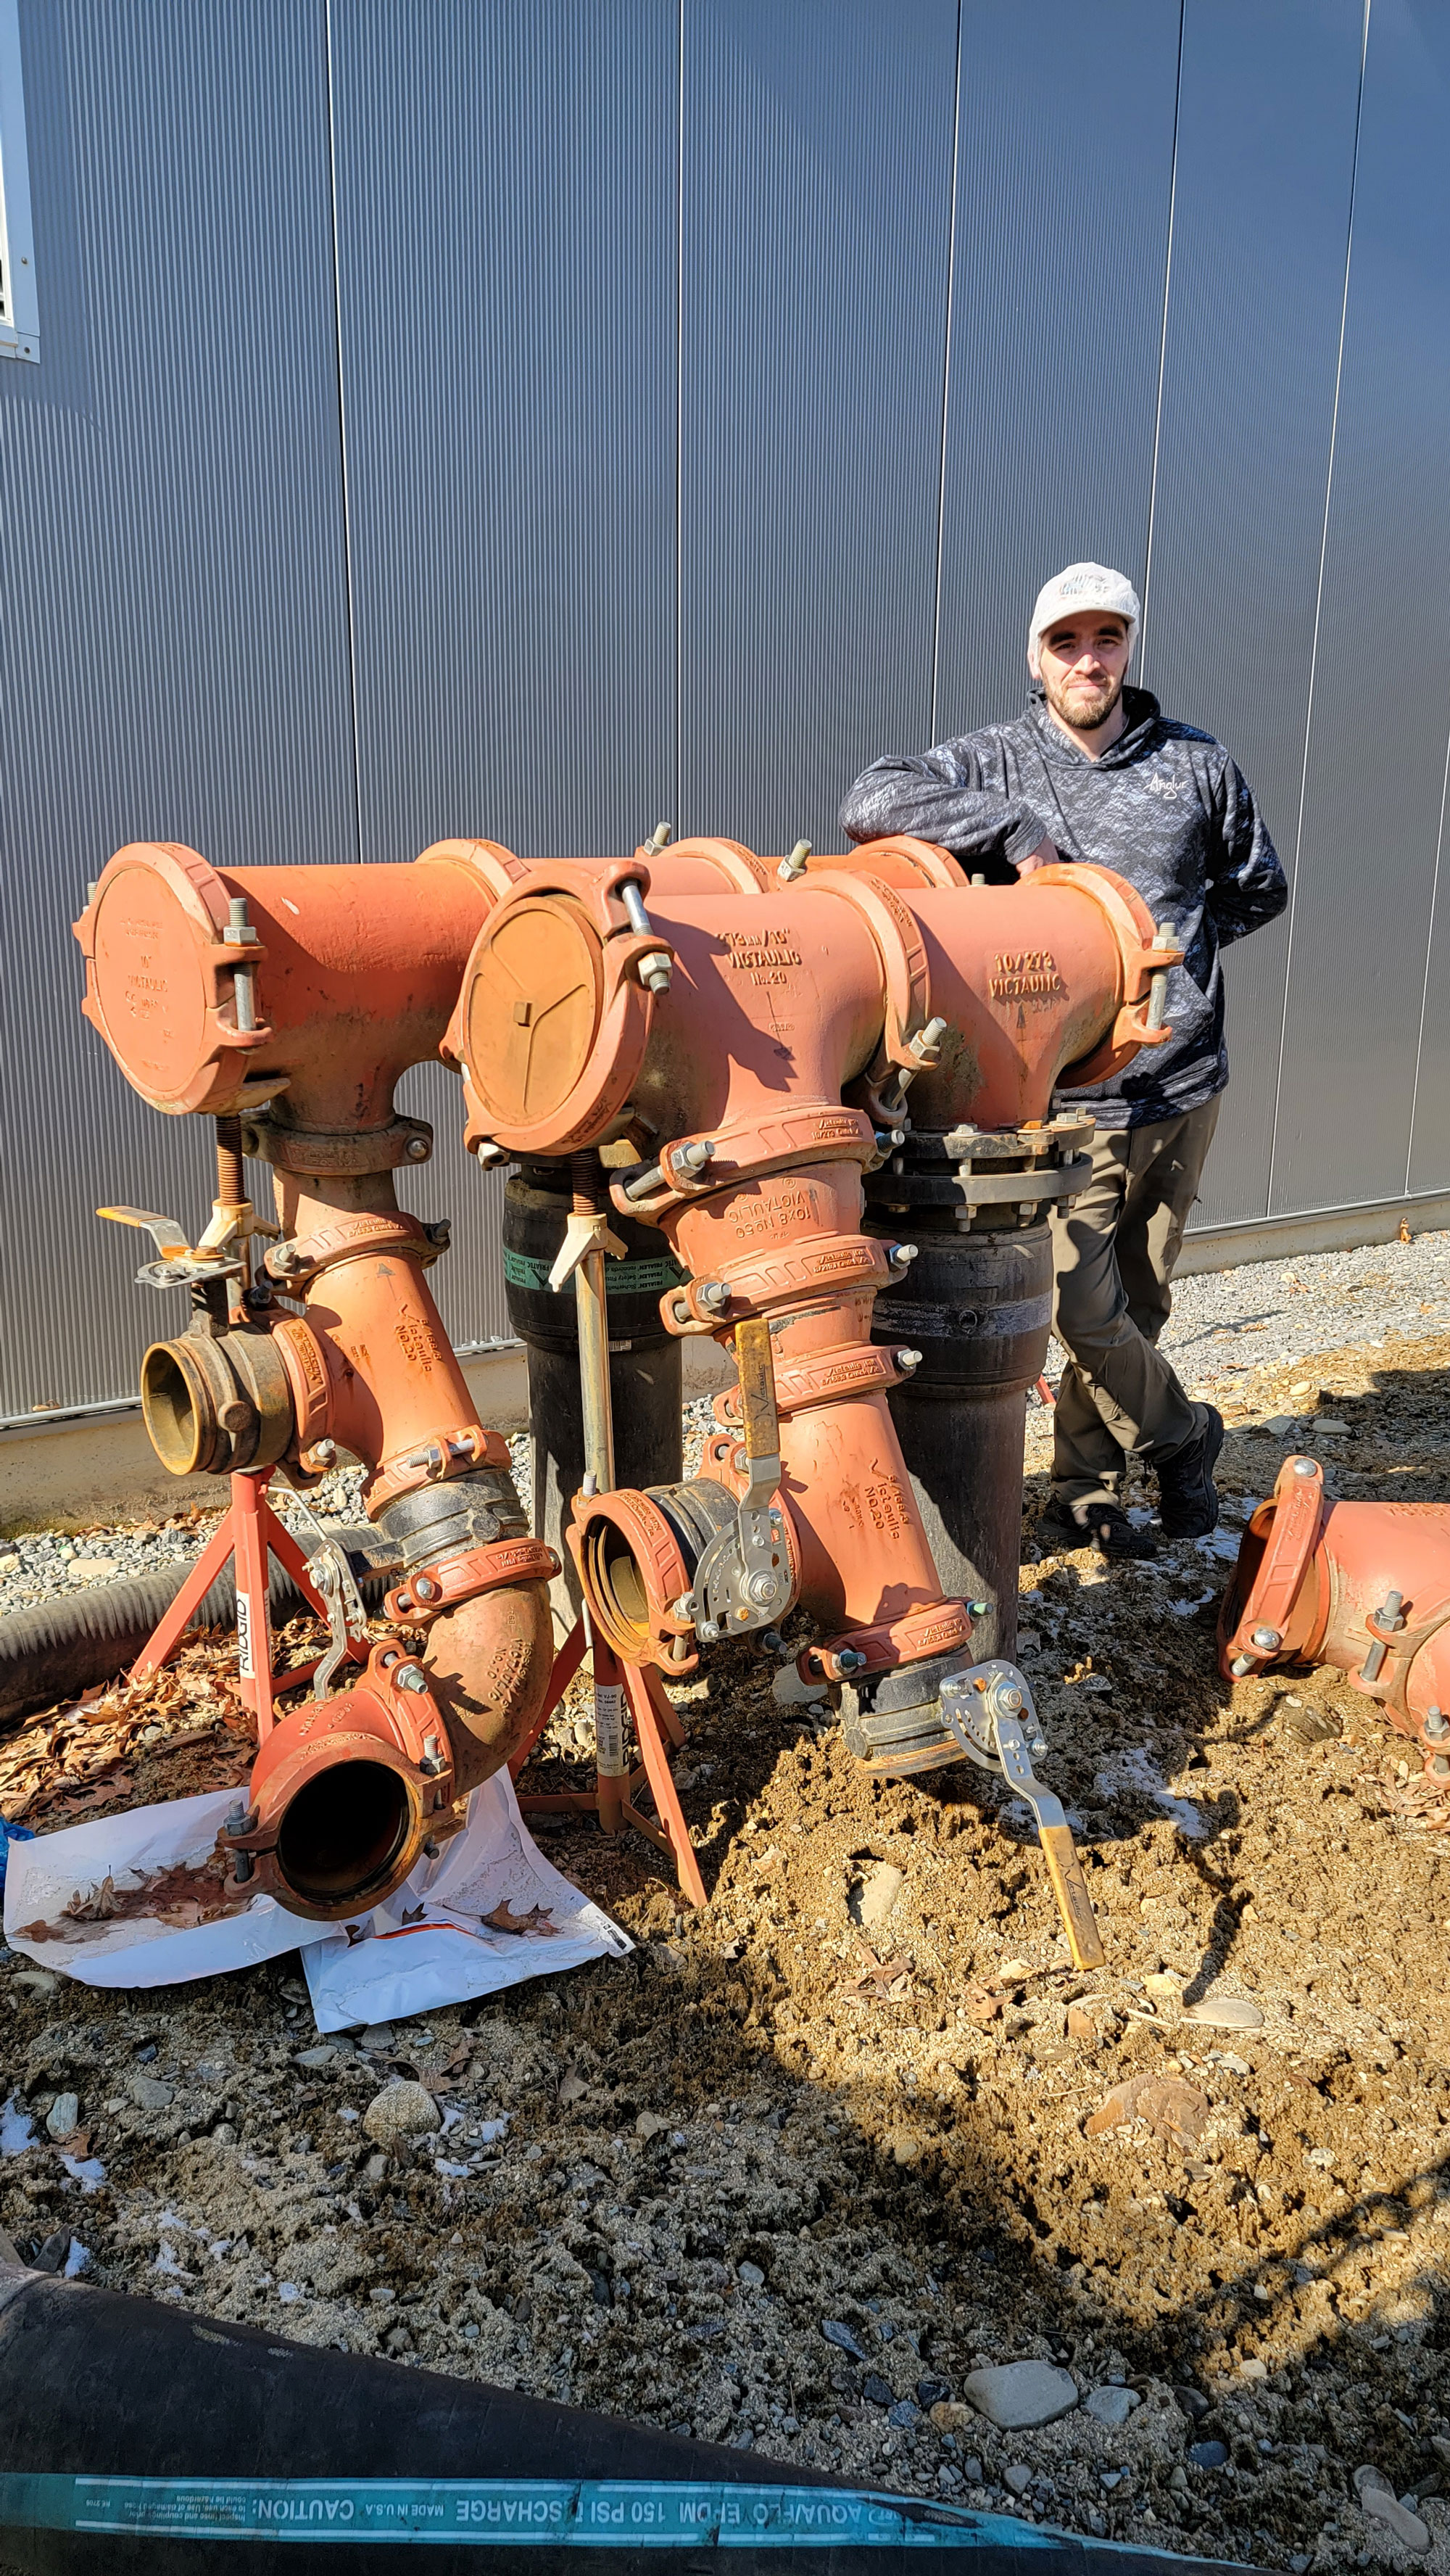 Maintenance Manager Steve Case for Little Leaf Farms in Massachusetts pictured next to input hookups for the greenhouse chiller